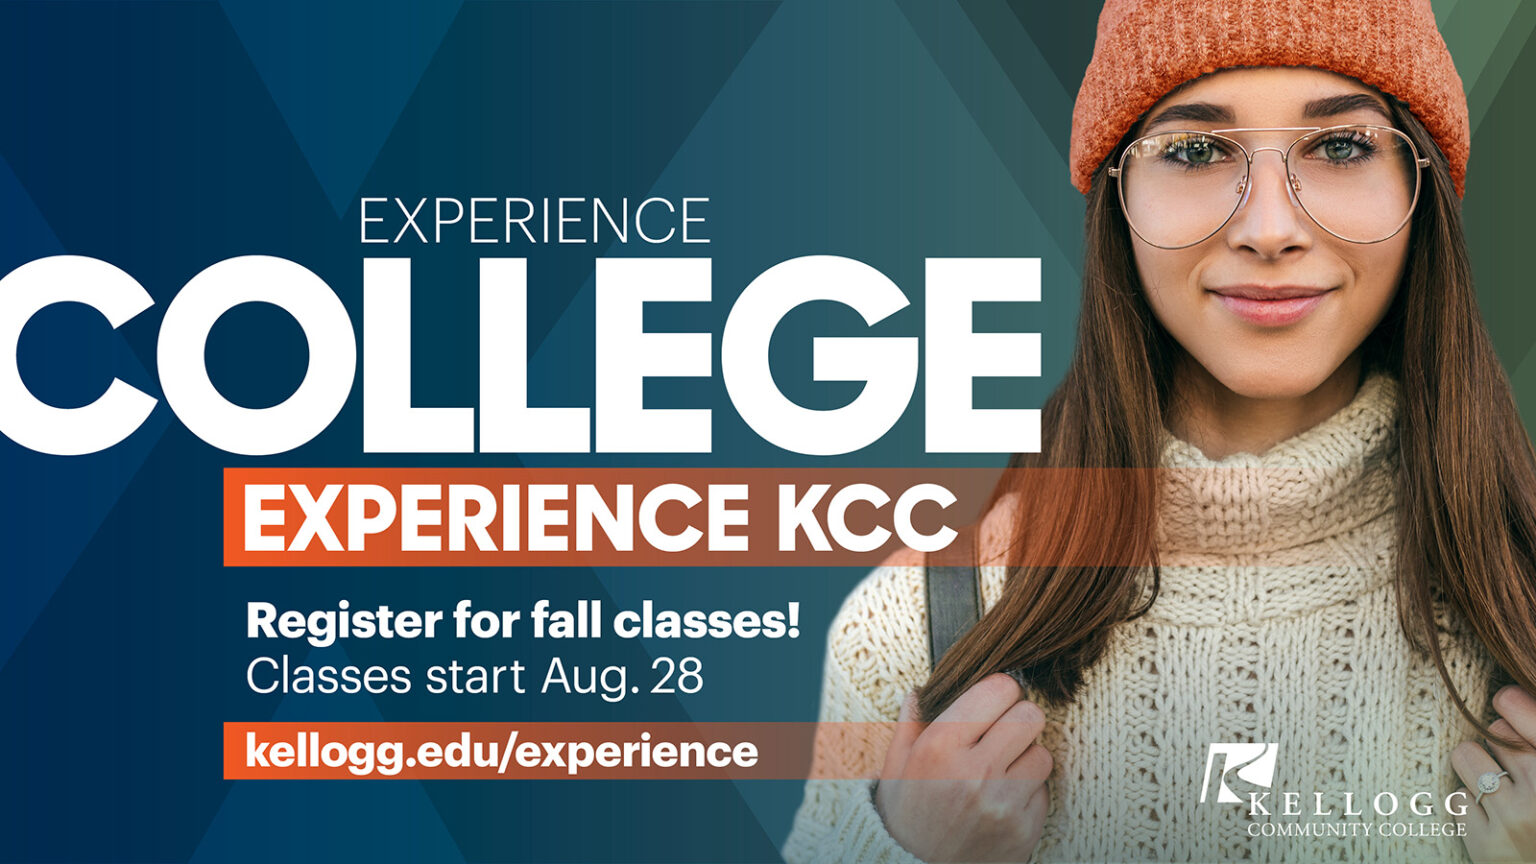 Fall semester registration is open now at Kellogg Community College